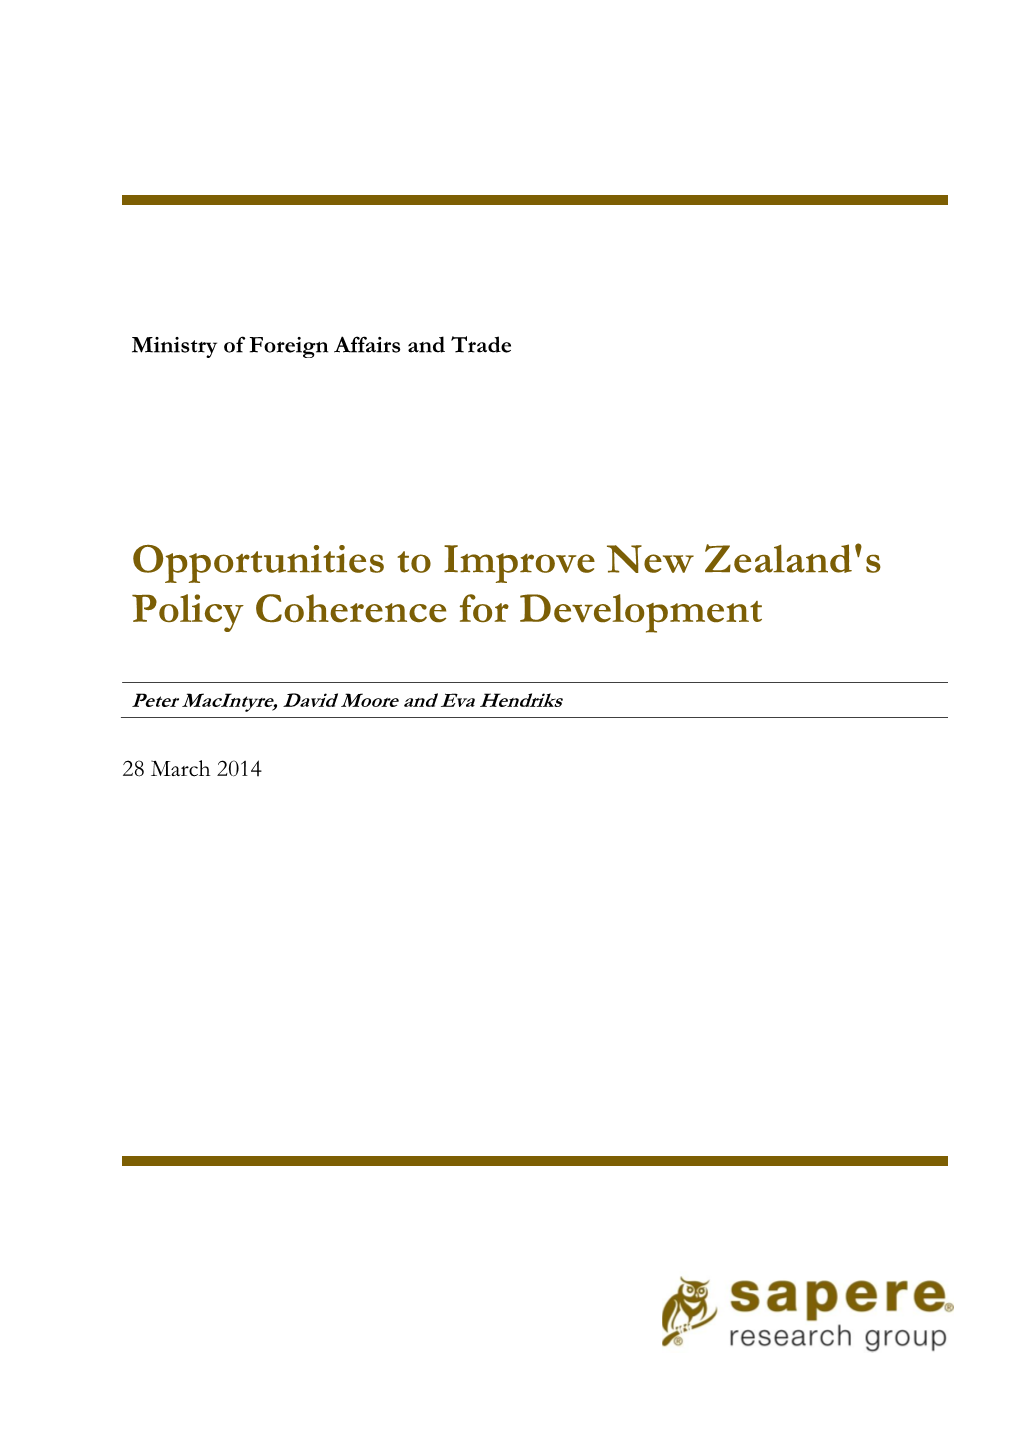 Opportunities to Improve NZ Policy Coherence for Development